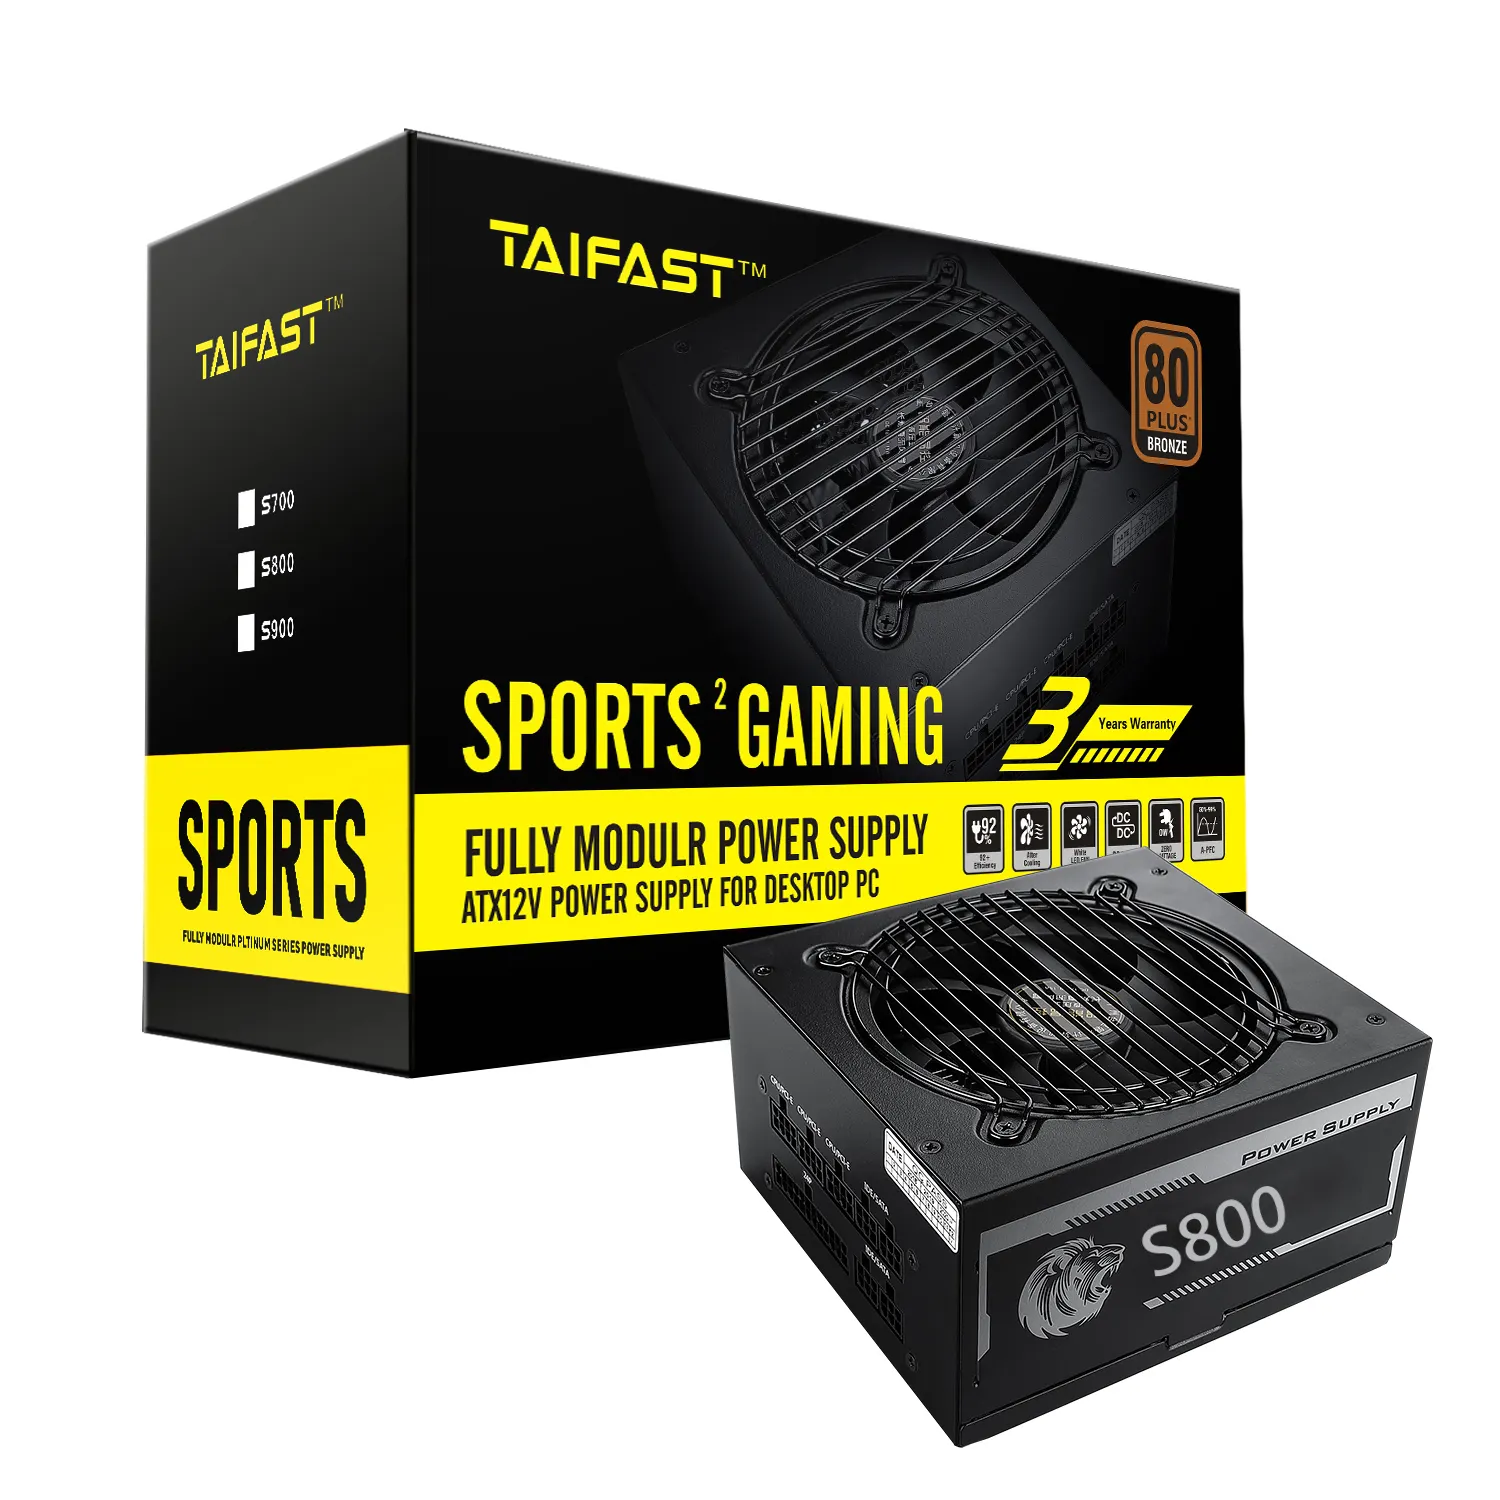 Taifast PC full power computer switch S800 600w quality efficiency power supply in stock